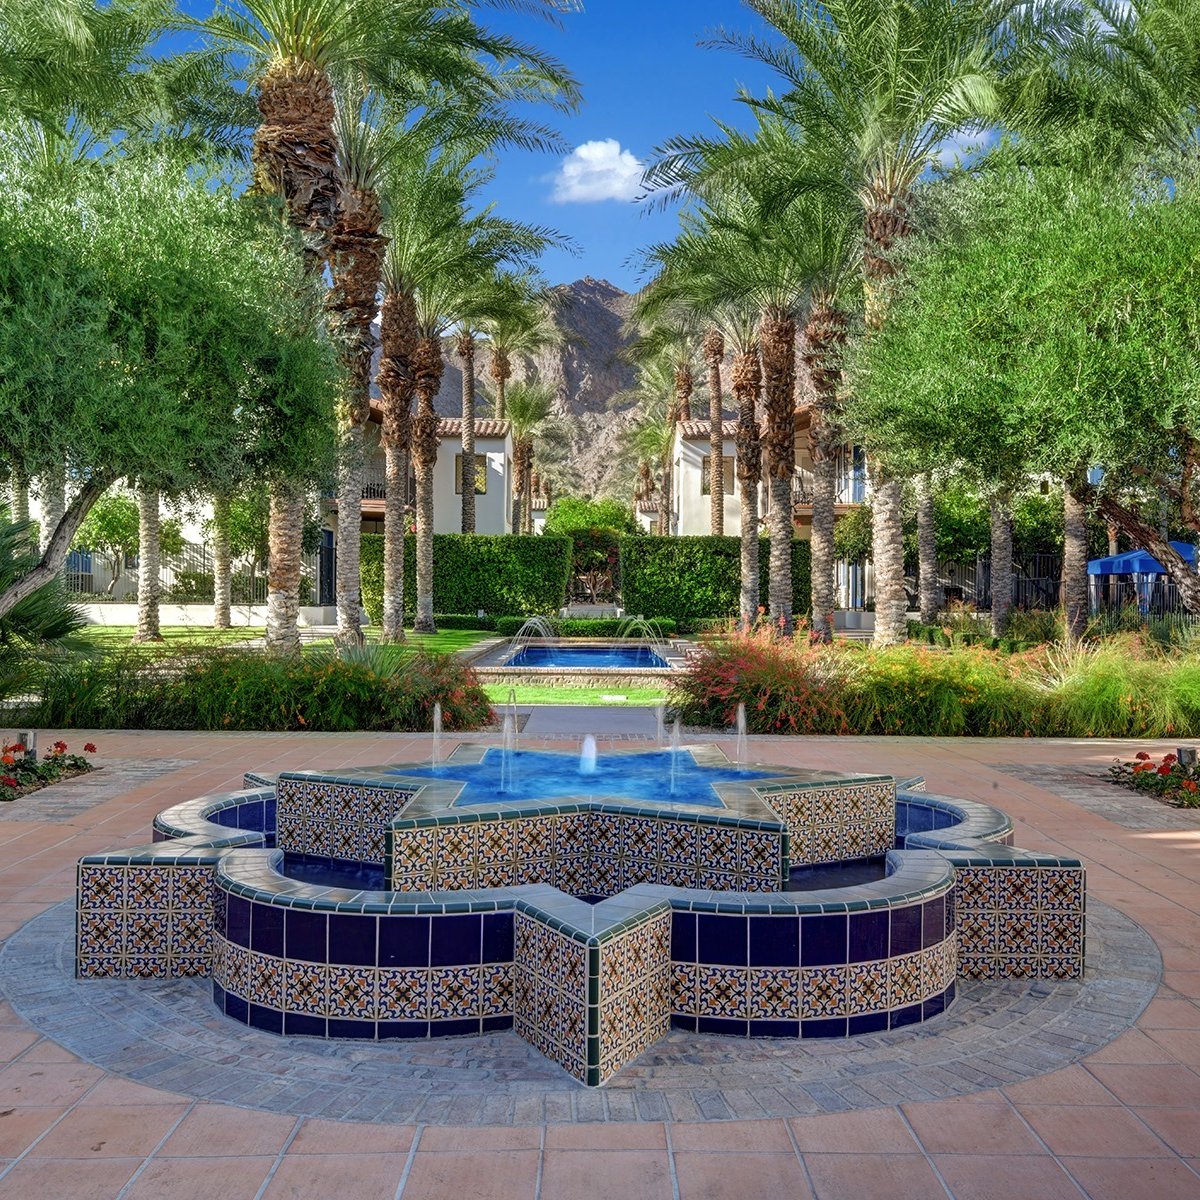 Relax in this tranquil setting adjacent to the world renown La Quinta Resort!